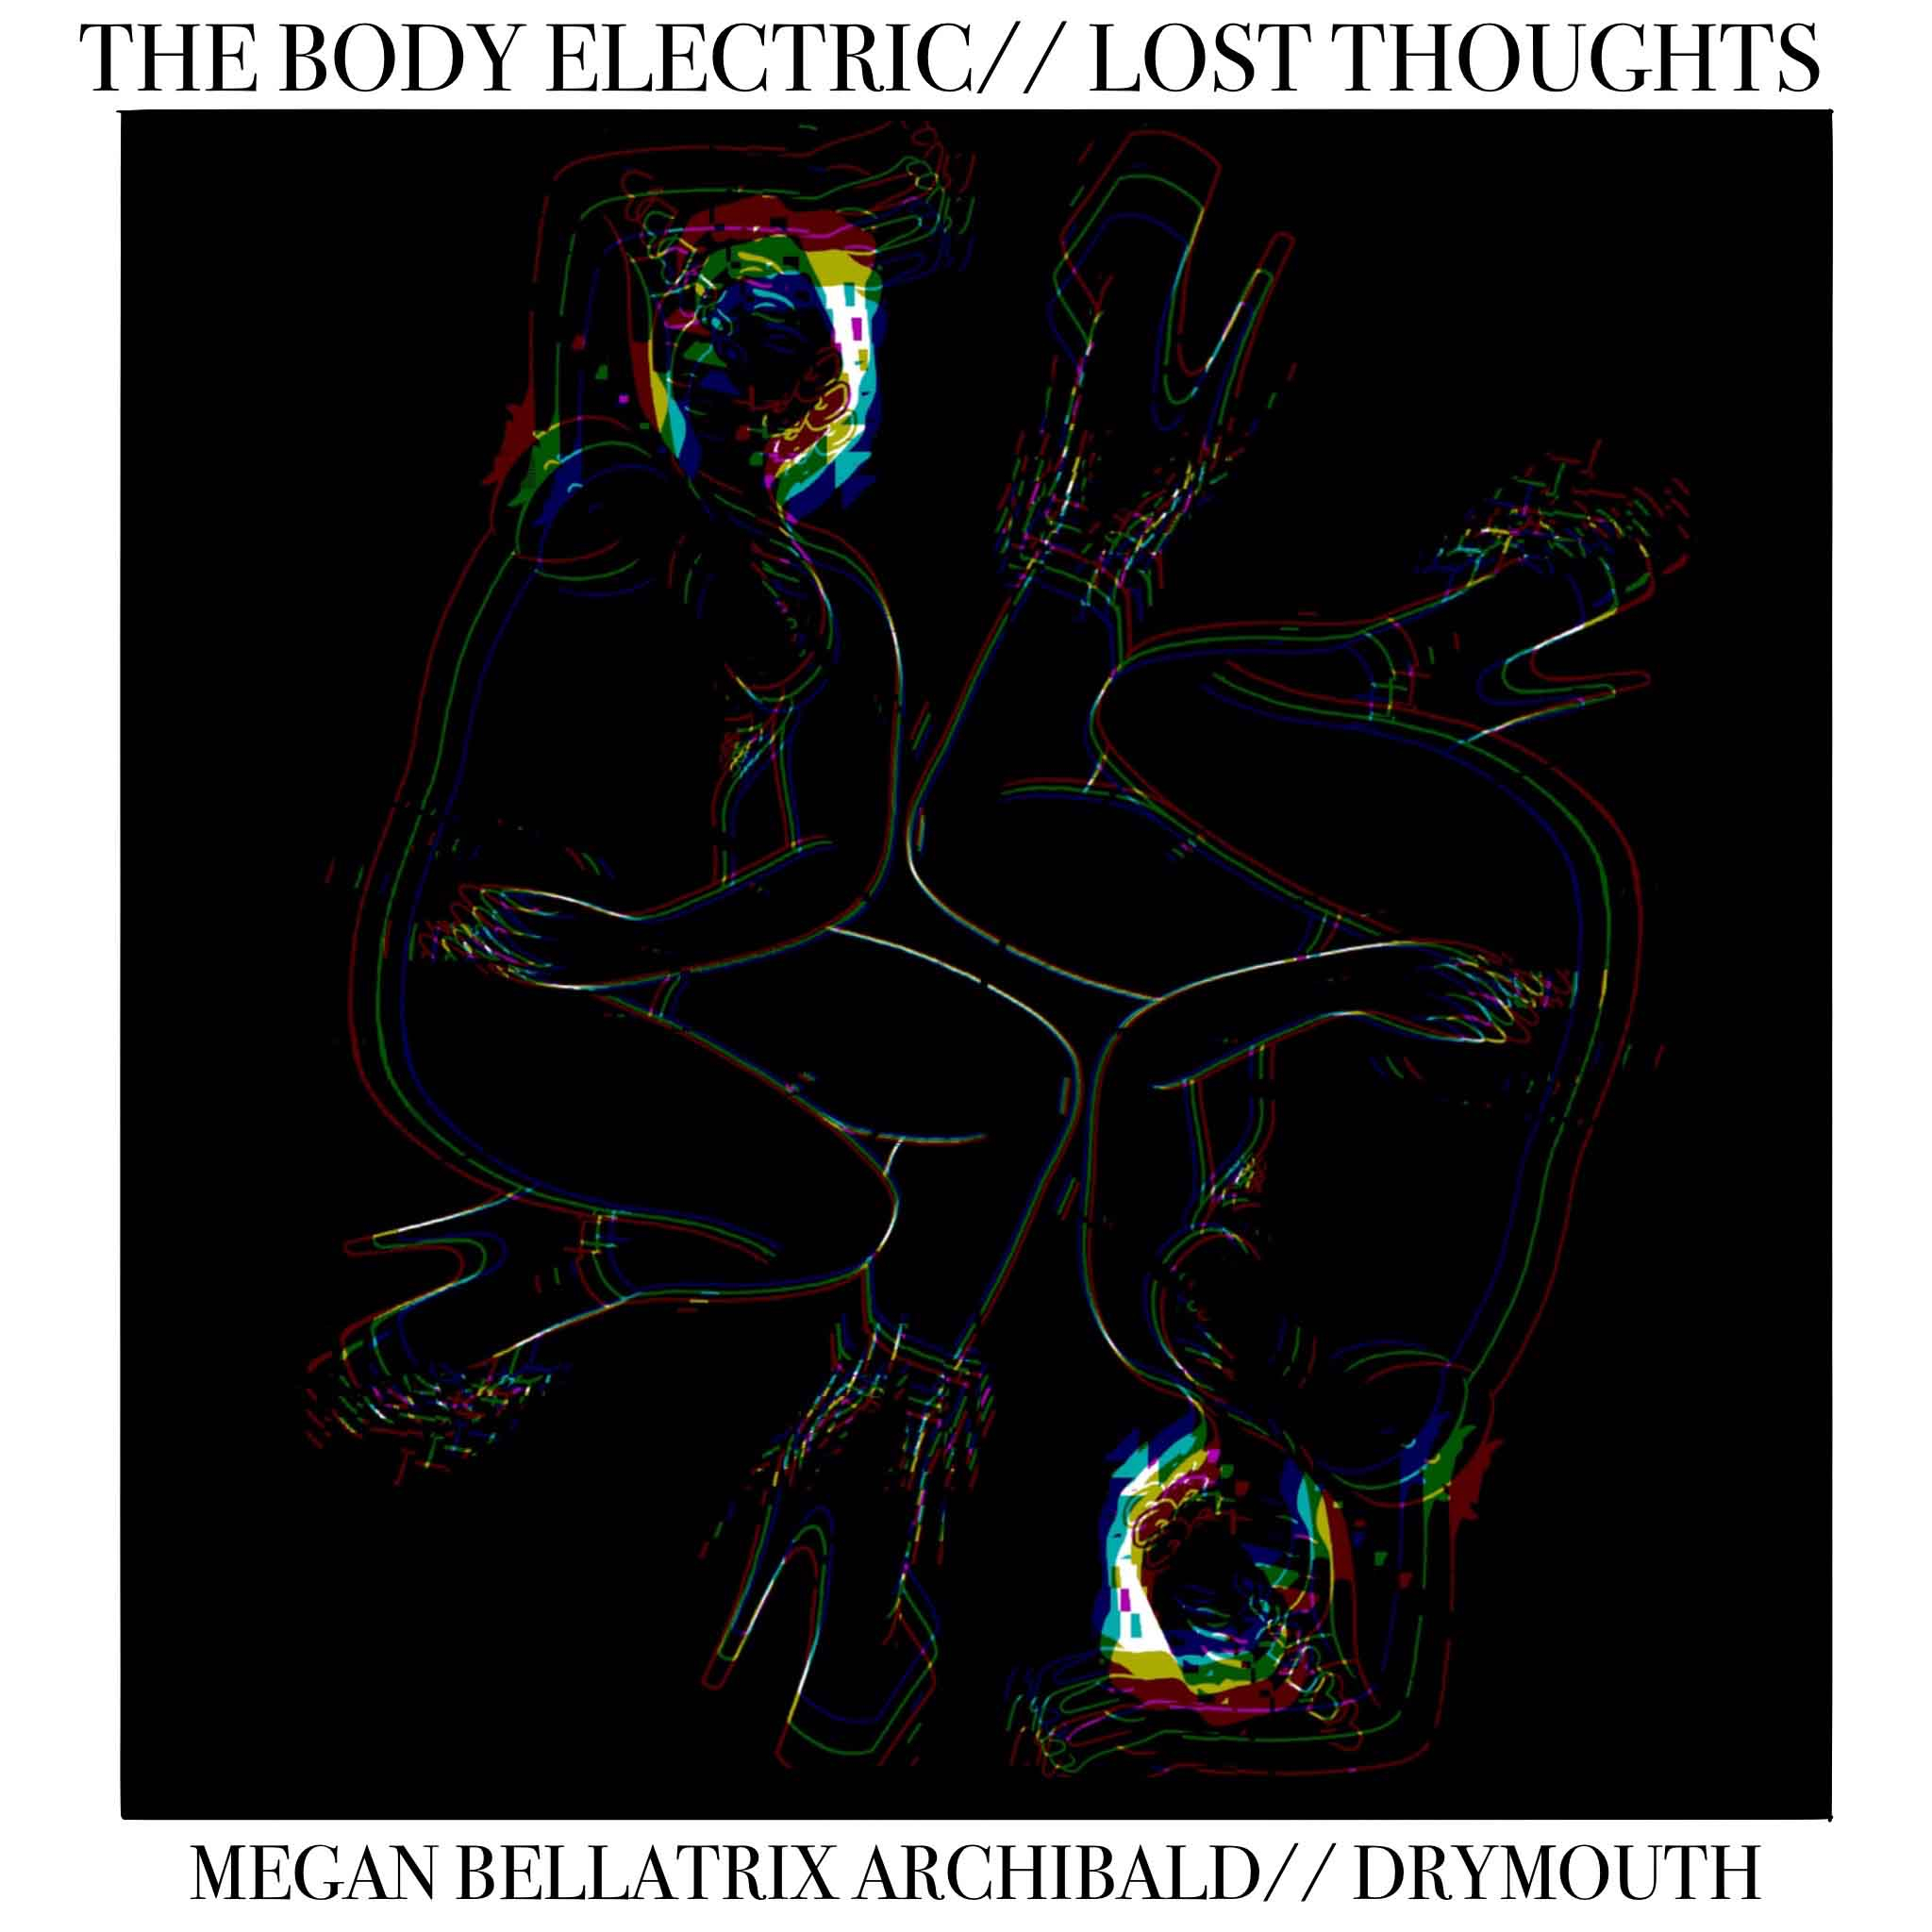 An album cover consisting of two chromatic images of a nude woman lying down wearing large platform boots. Above save THE BODY ELECTRIC//LOST THOUGHTS, below says MEGAN BELLATRIX ARCHIBALD//DRYMOUTH